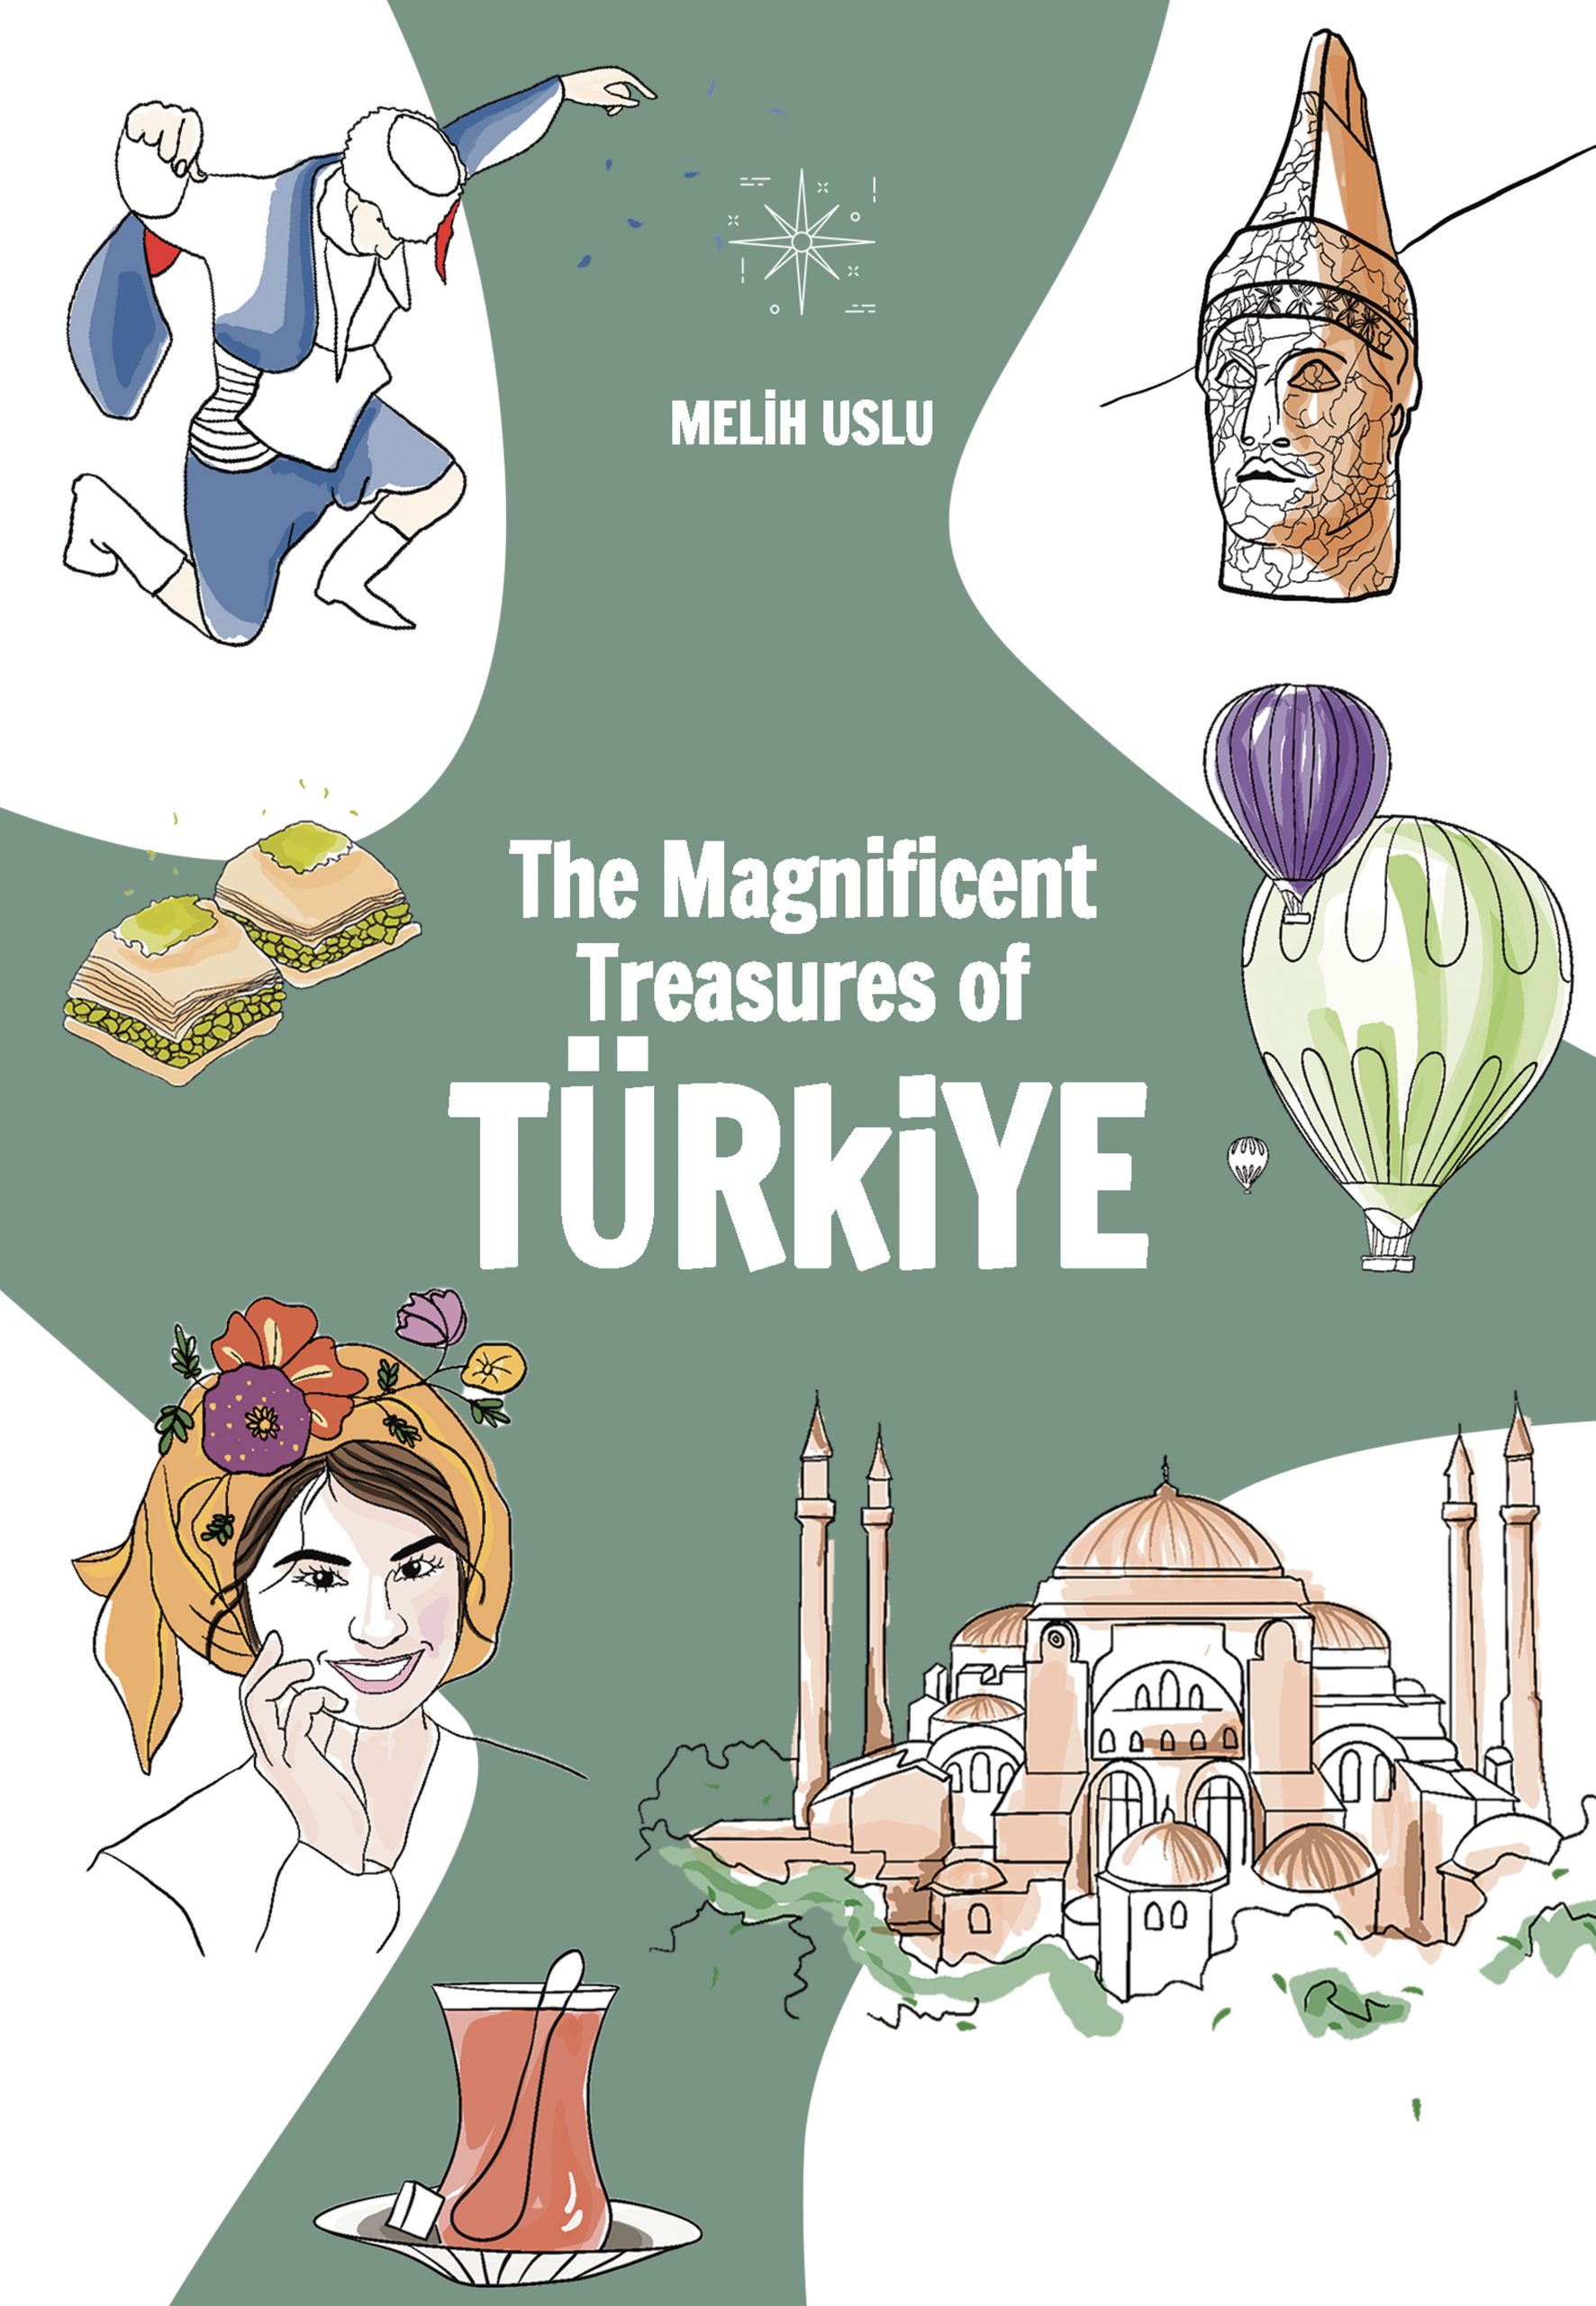 The Magnificient Treasures of Turkey